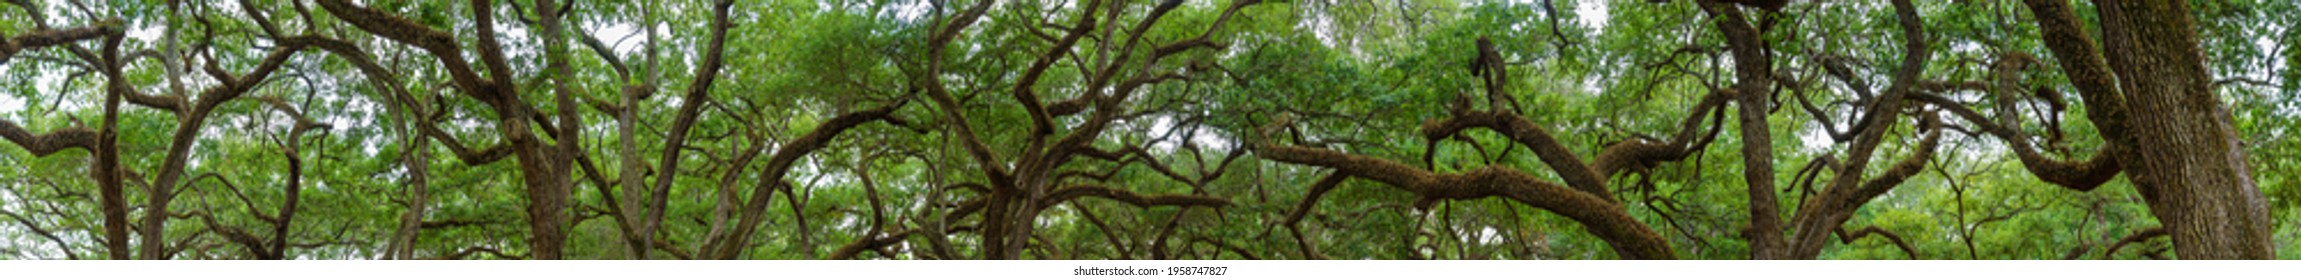 Panorama of Southern live oak tree canopy (Quercus virginiana), covered in resurrection fern (Pleopeltis polypodioides) - Topeekeegee Yugnee (TY) Park, Hollywood, Florida, USA